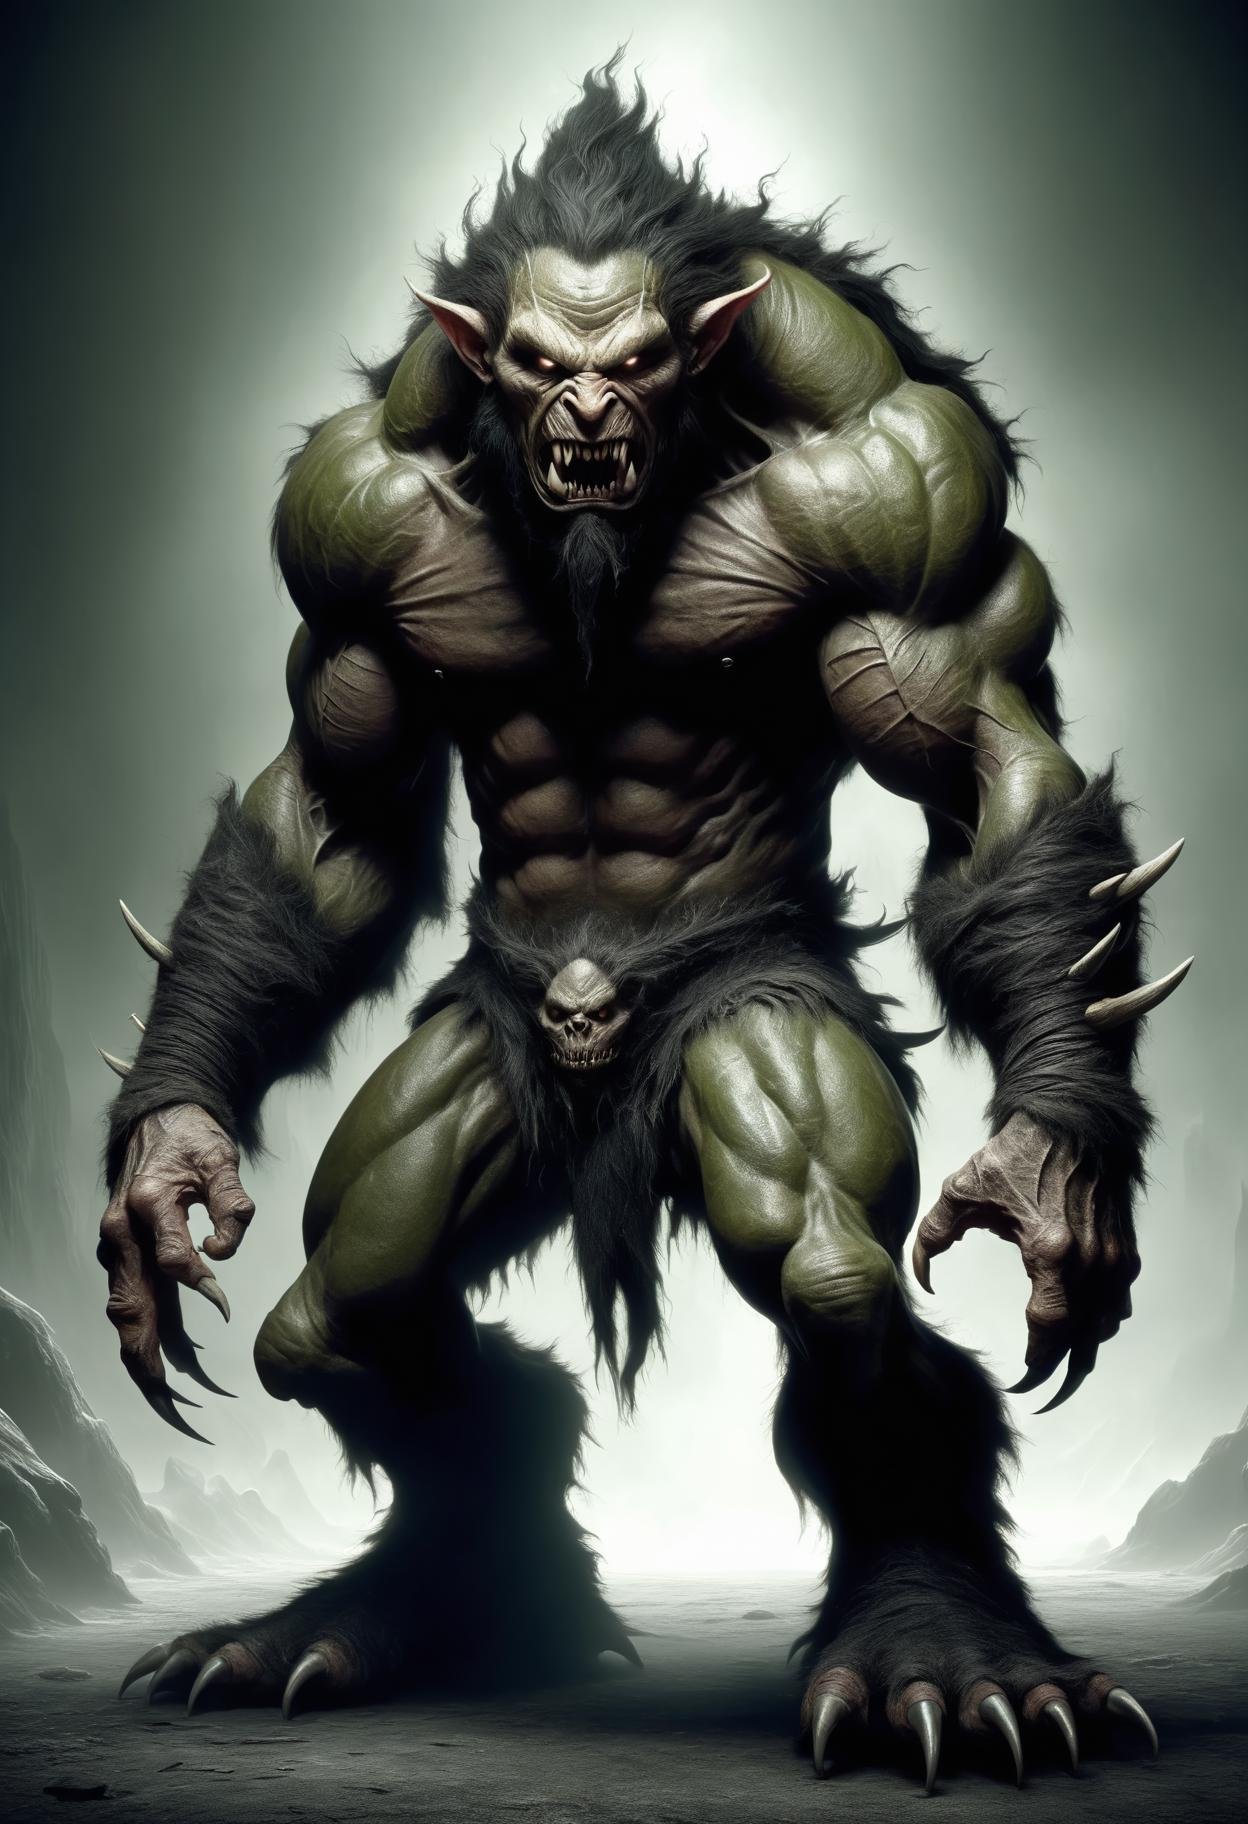 elf, large humanoid creature, brutish monstrous appearance, muscular hulking physique, exaggerated facial features, tusks, , earth toned skin, primitive crude clothing, strength, intimidating presence,  ,dreadful,energetic,project,DonM3v1lM4dn355XL <lora:DonM3v1lM4dn355XL-v1.1-000012:0.8>